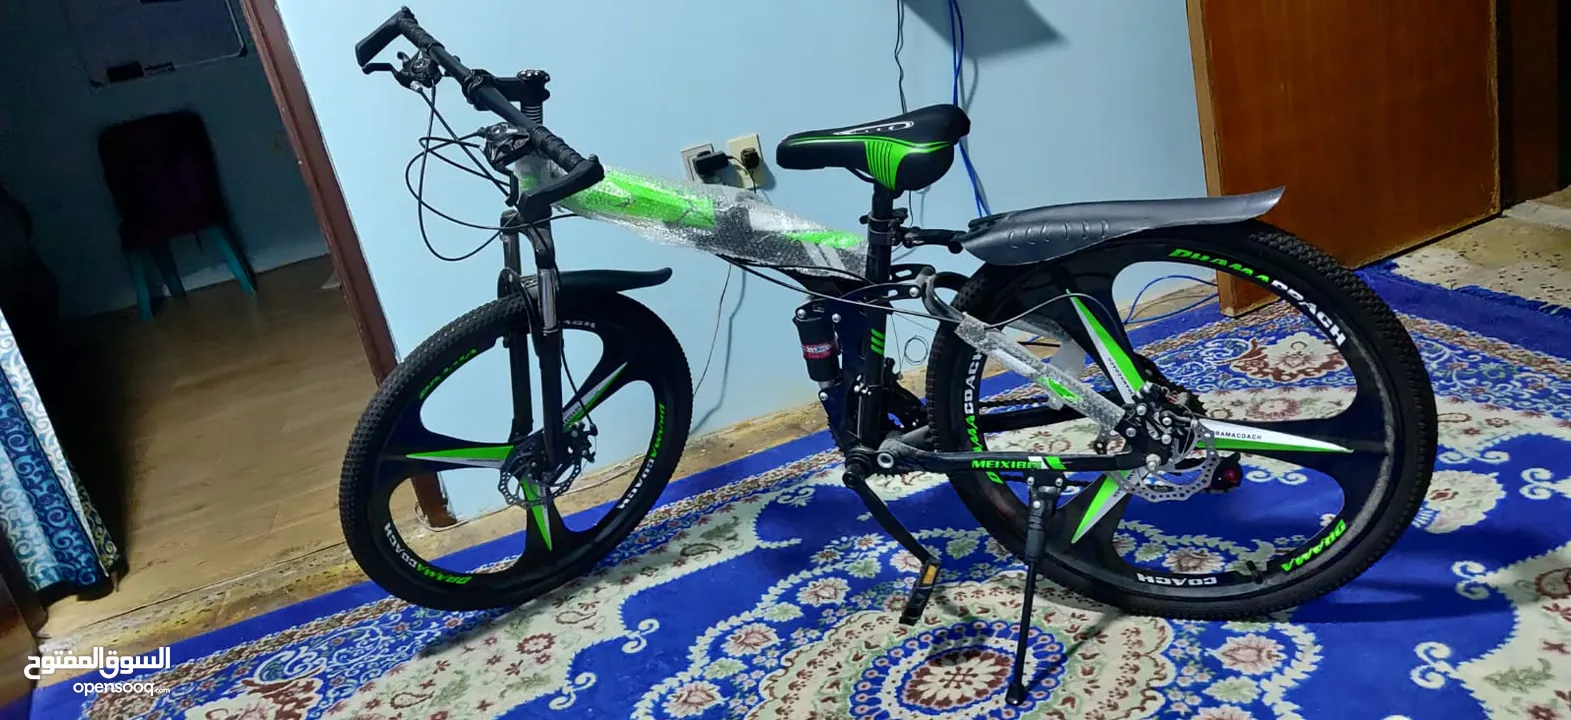 New auto gear bicycle